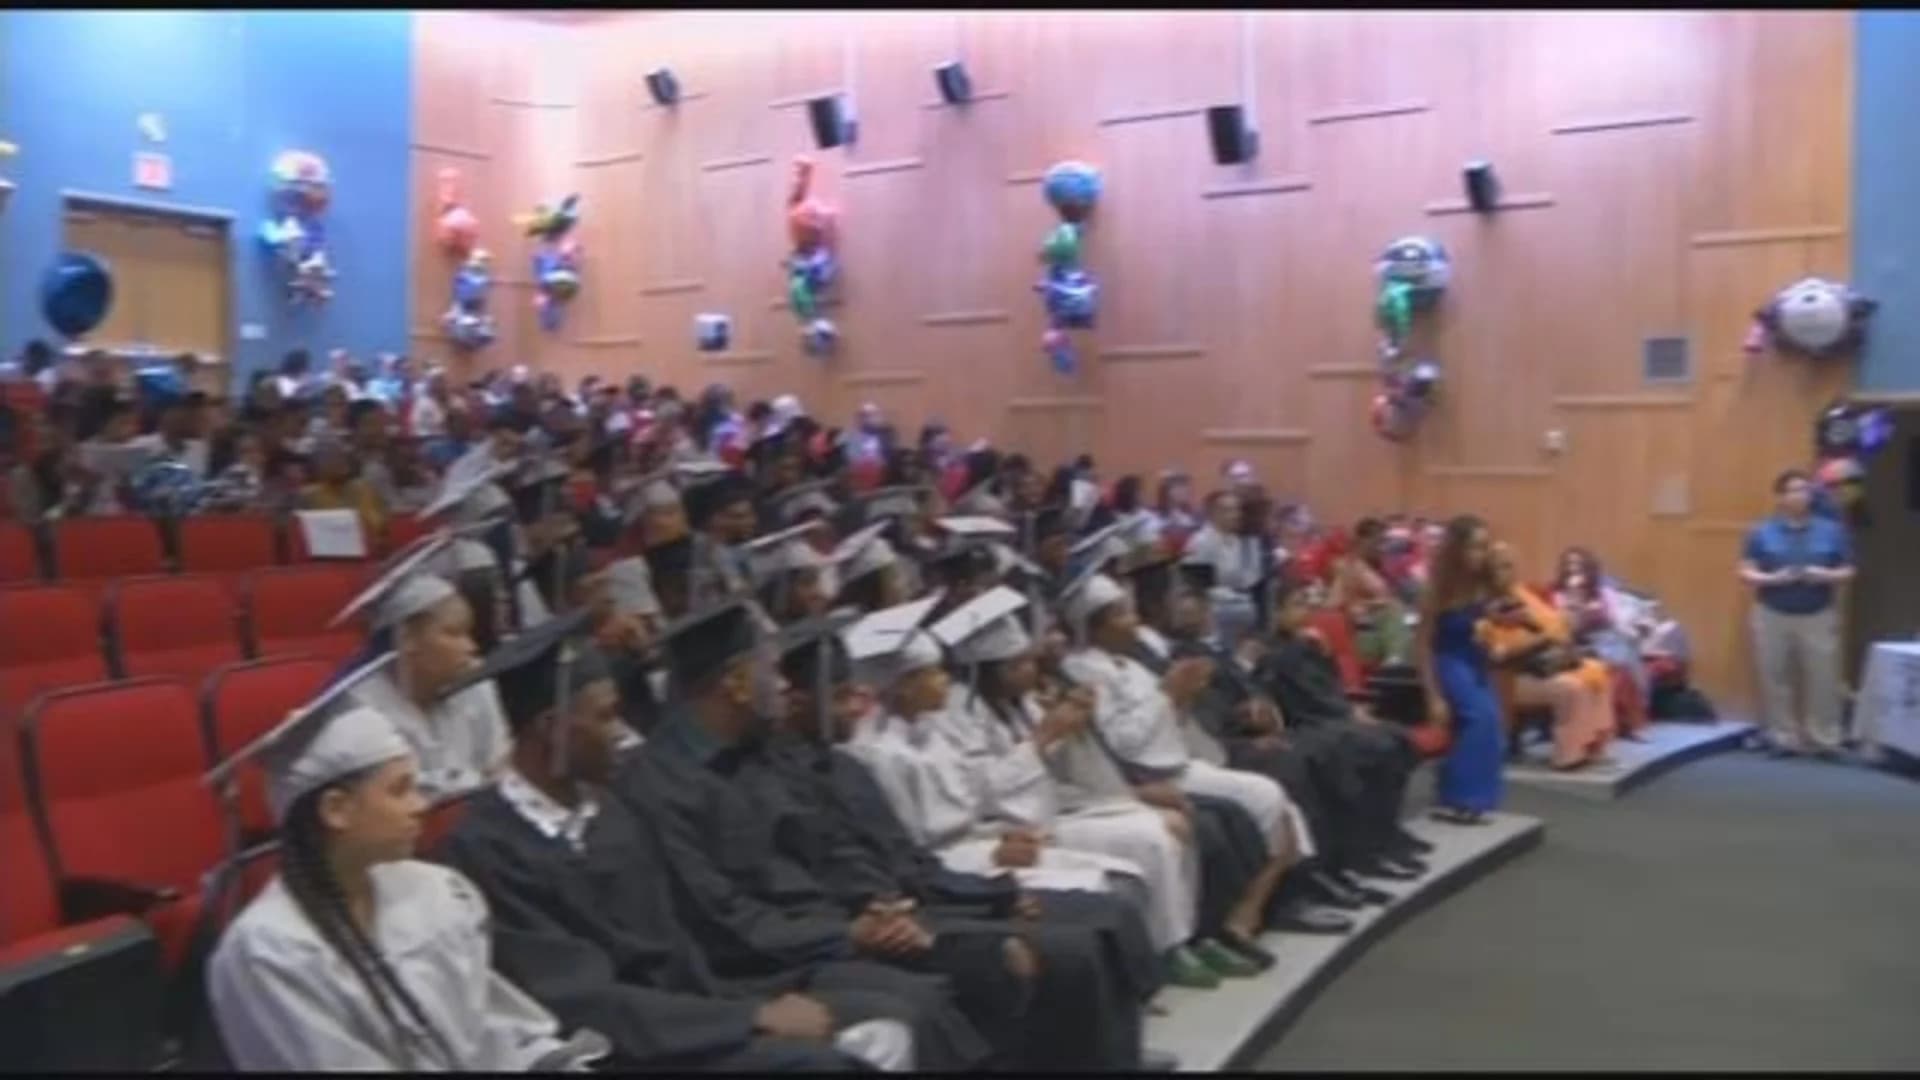 Students get second chance at high school diplomas